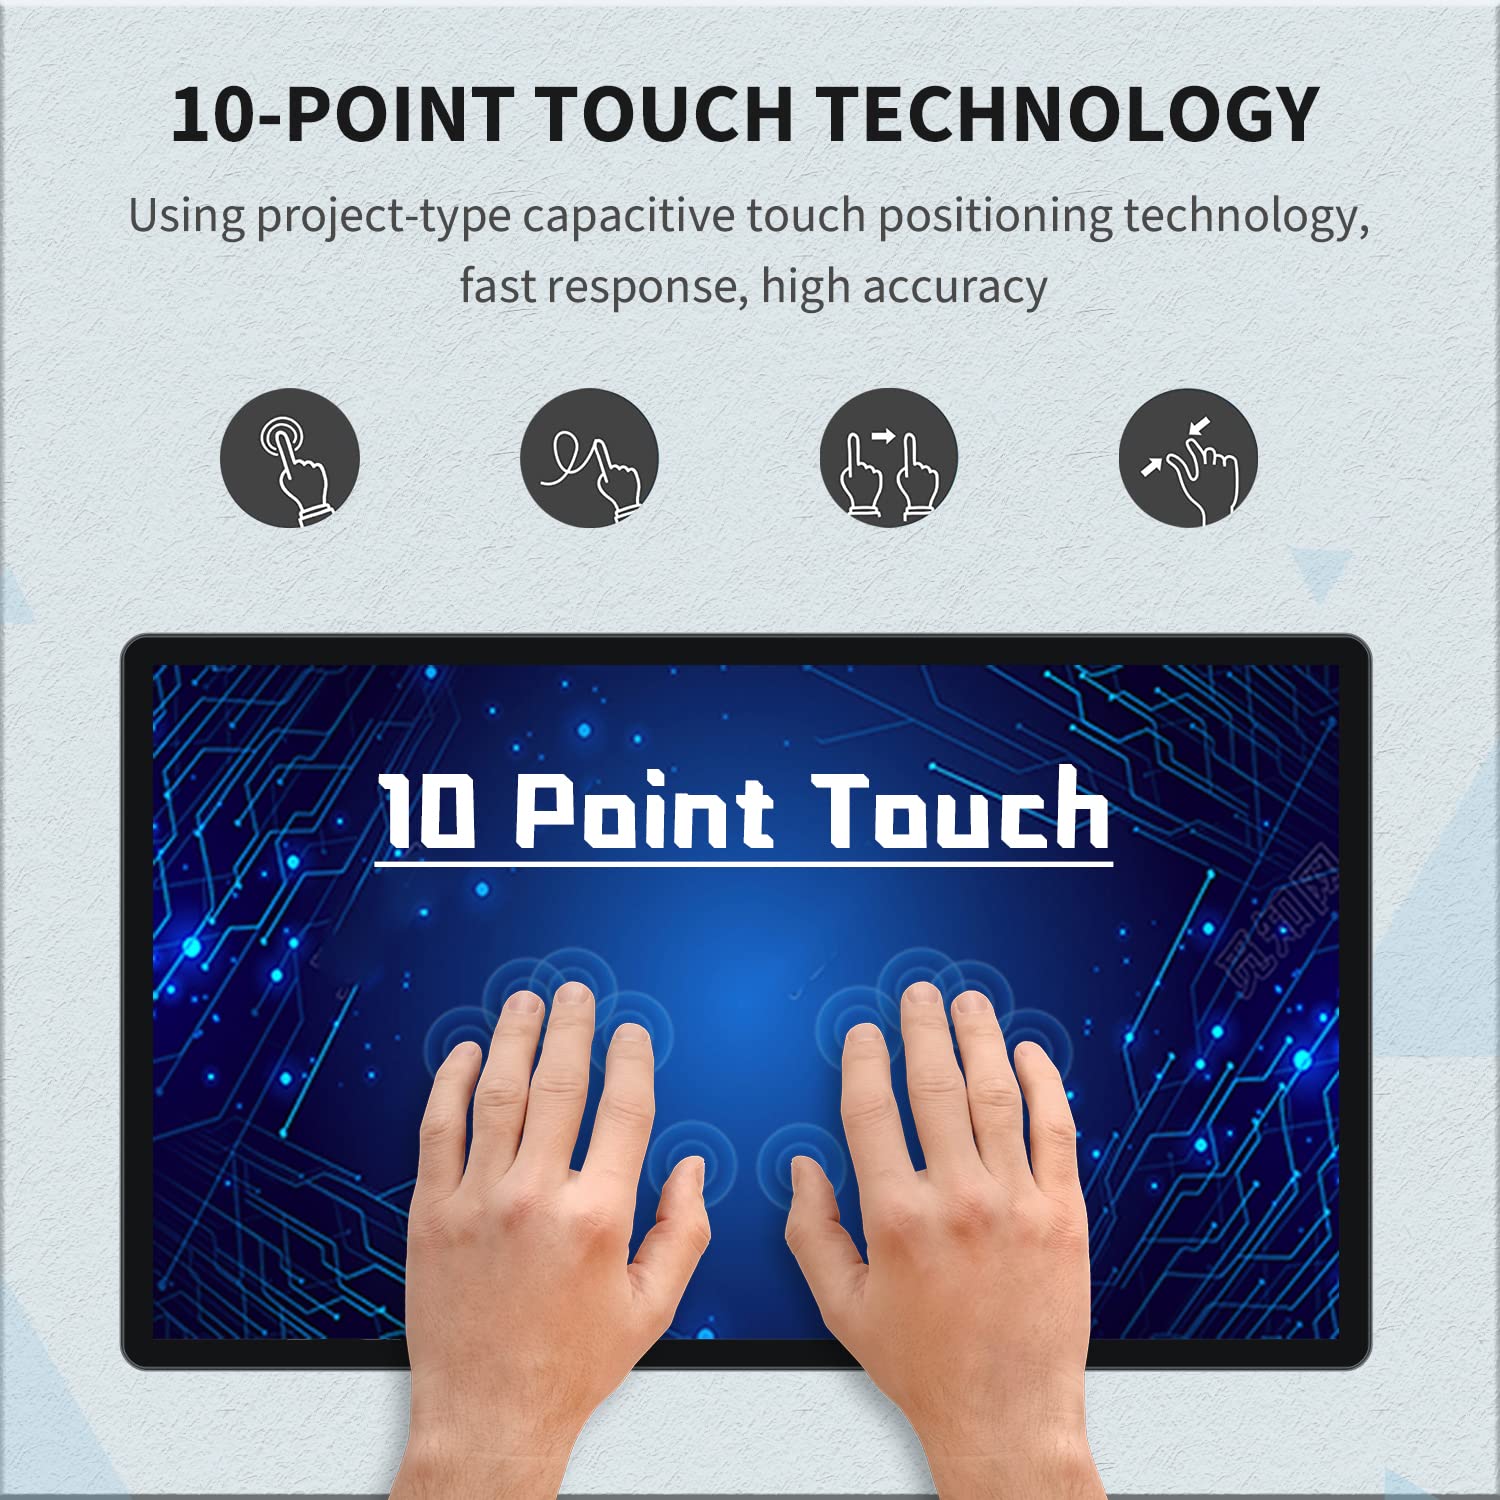 TouchWo 21.5 inch Touch Screen All-in-One Industrial PC, i7, 8GB RAM, 256G ROM, 16:9 FHD 1080P, Windows 10, Smart Board for Classroom, Meeting & Game, USB, VGA & HDMI Monitor